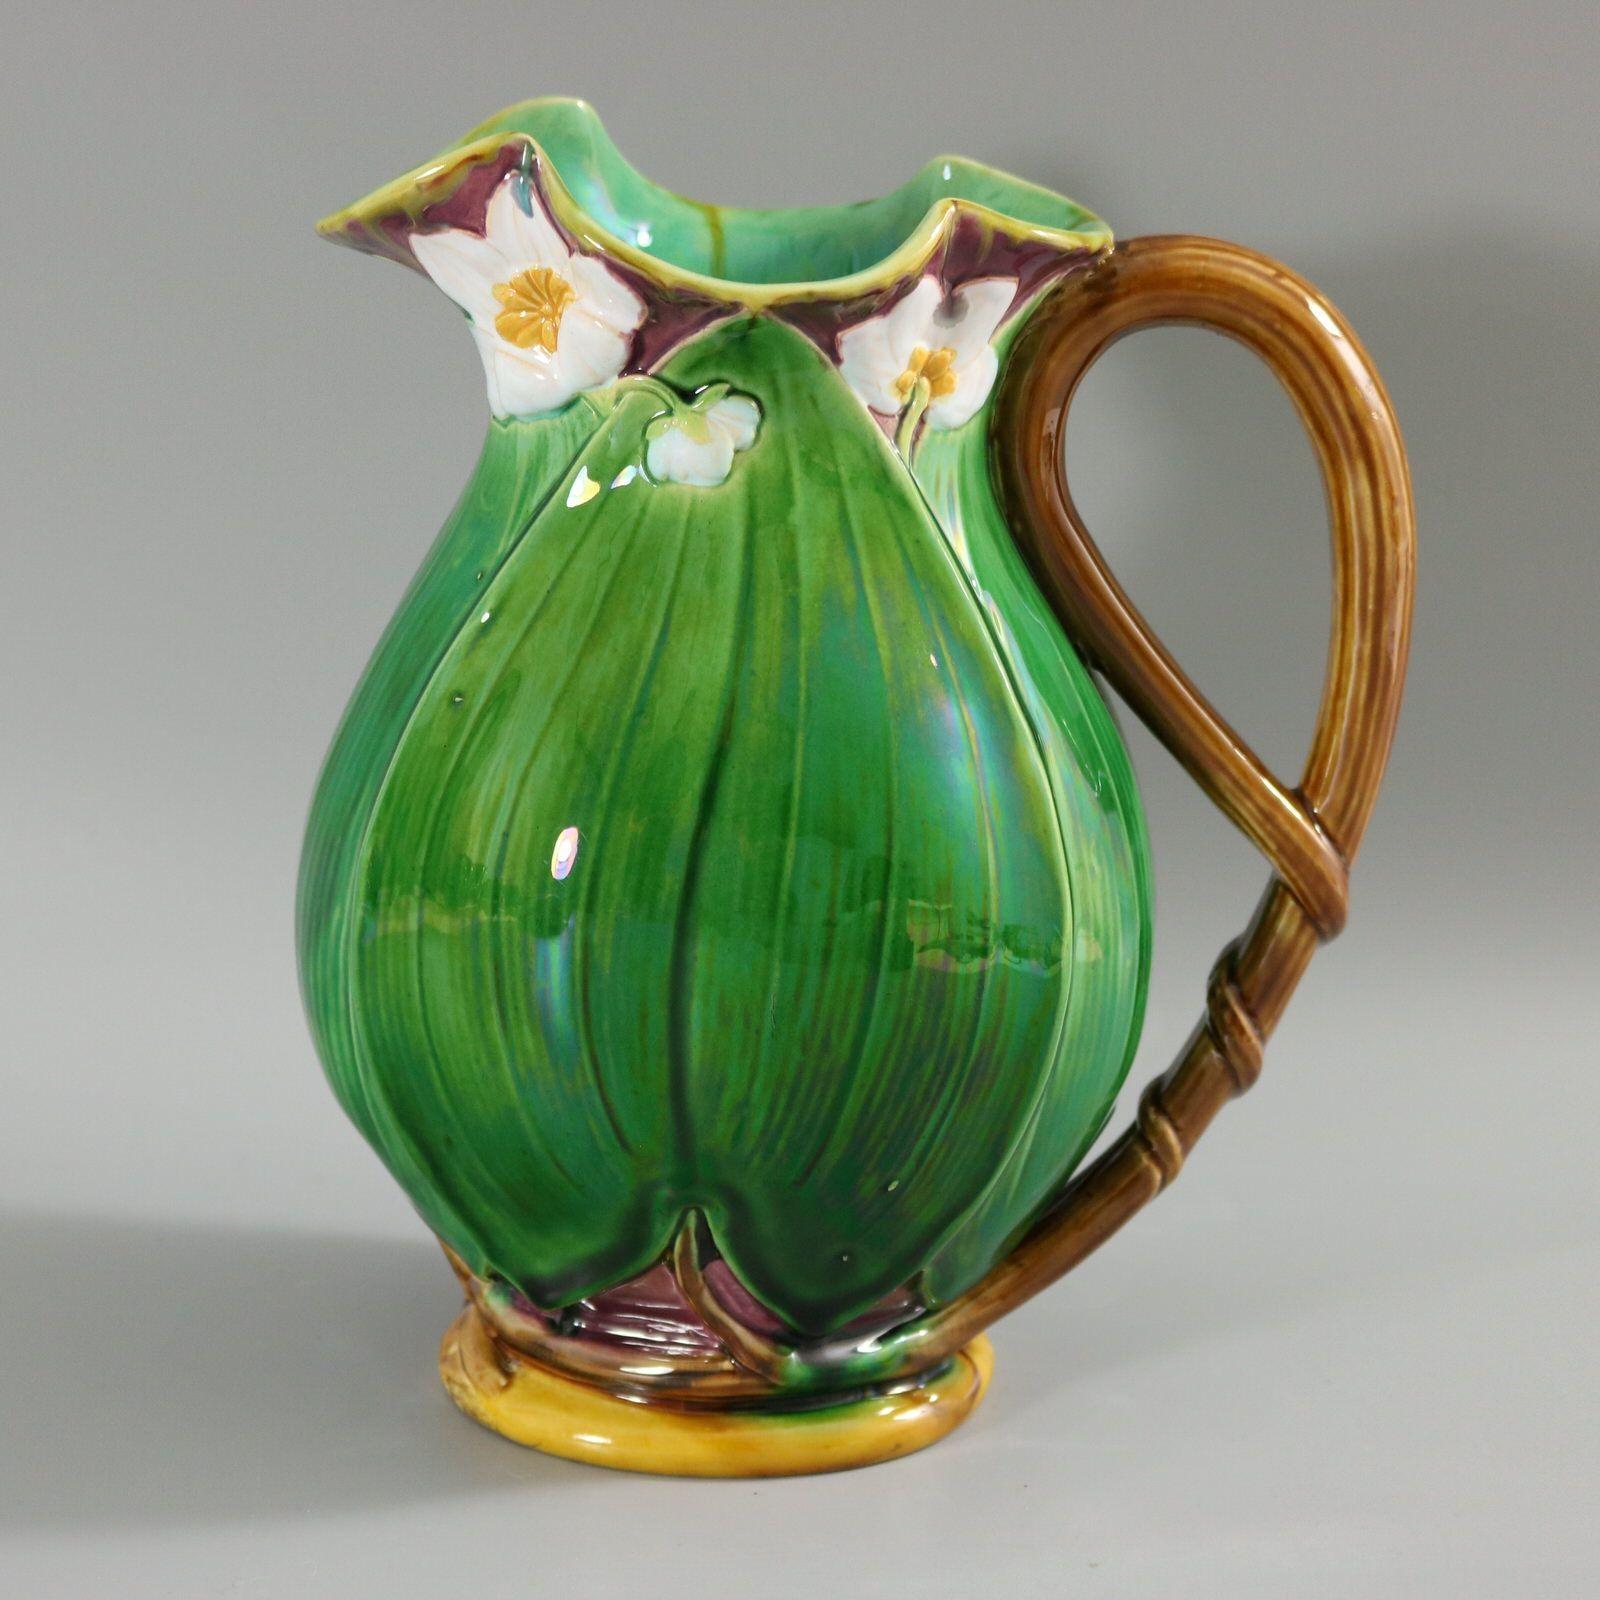 Minton Majolica jug/pitcher which features flowering lilies and lily pads. Colouration: green, white, dark pink, are predominant. The piece bears maker's marks for the Minton pottery. Bears a pattern number, '1228 12'. Marks include a factory